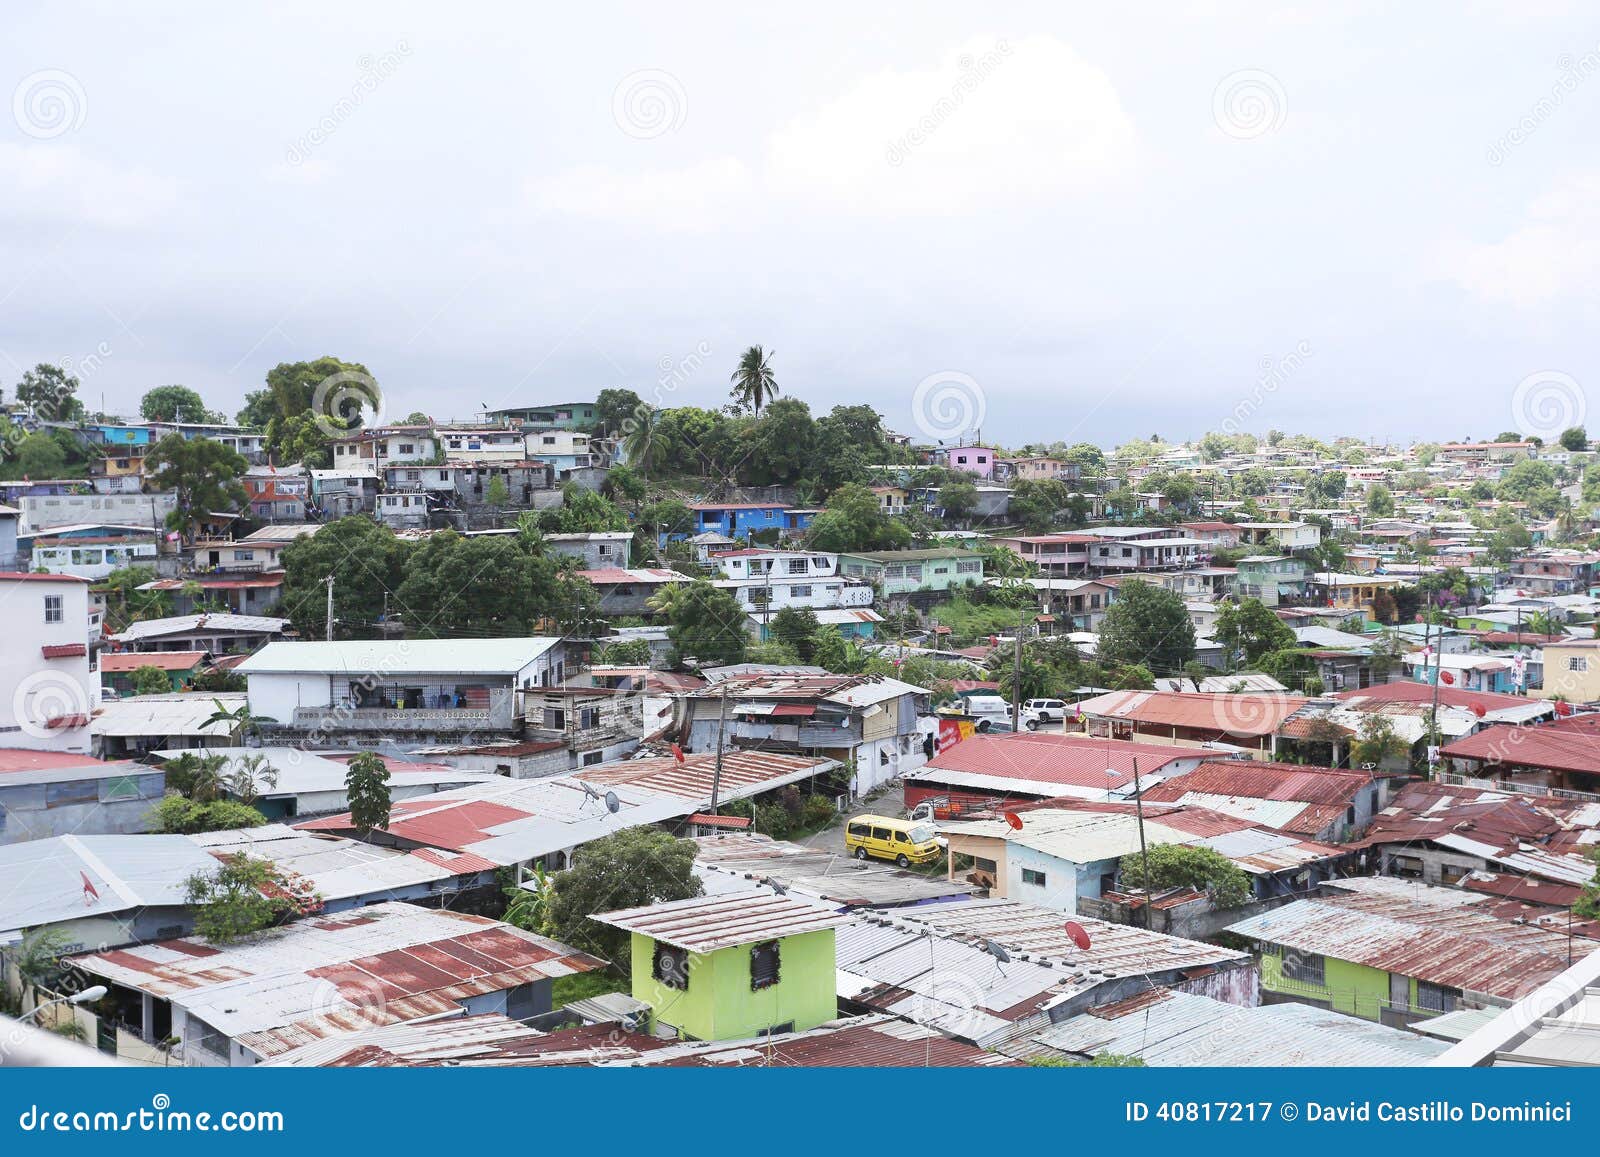 aerial view of shanty towns in panama city, panama